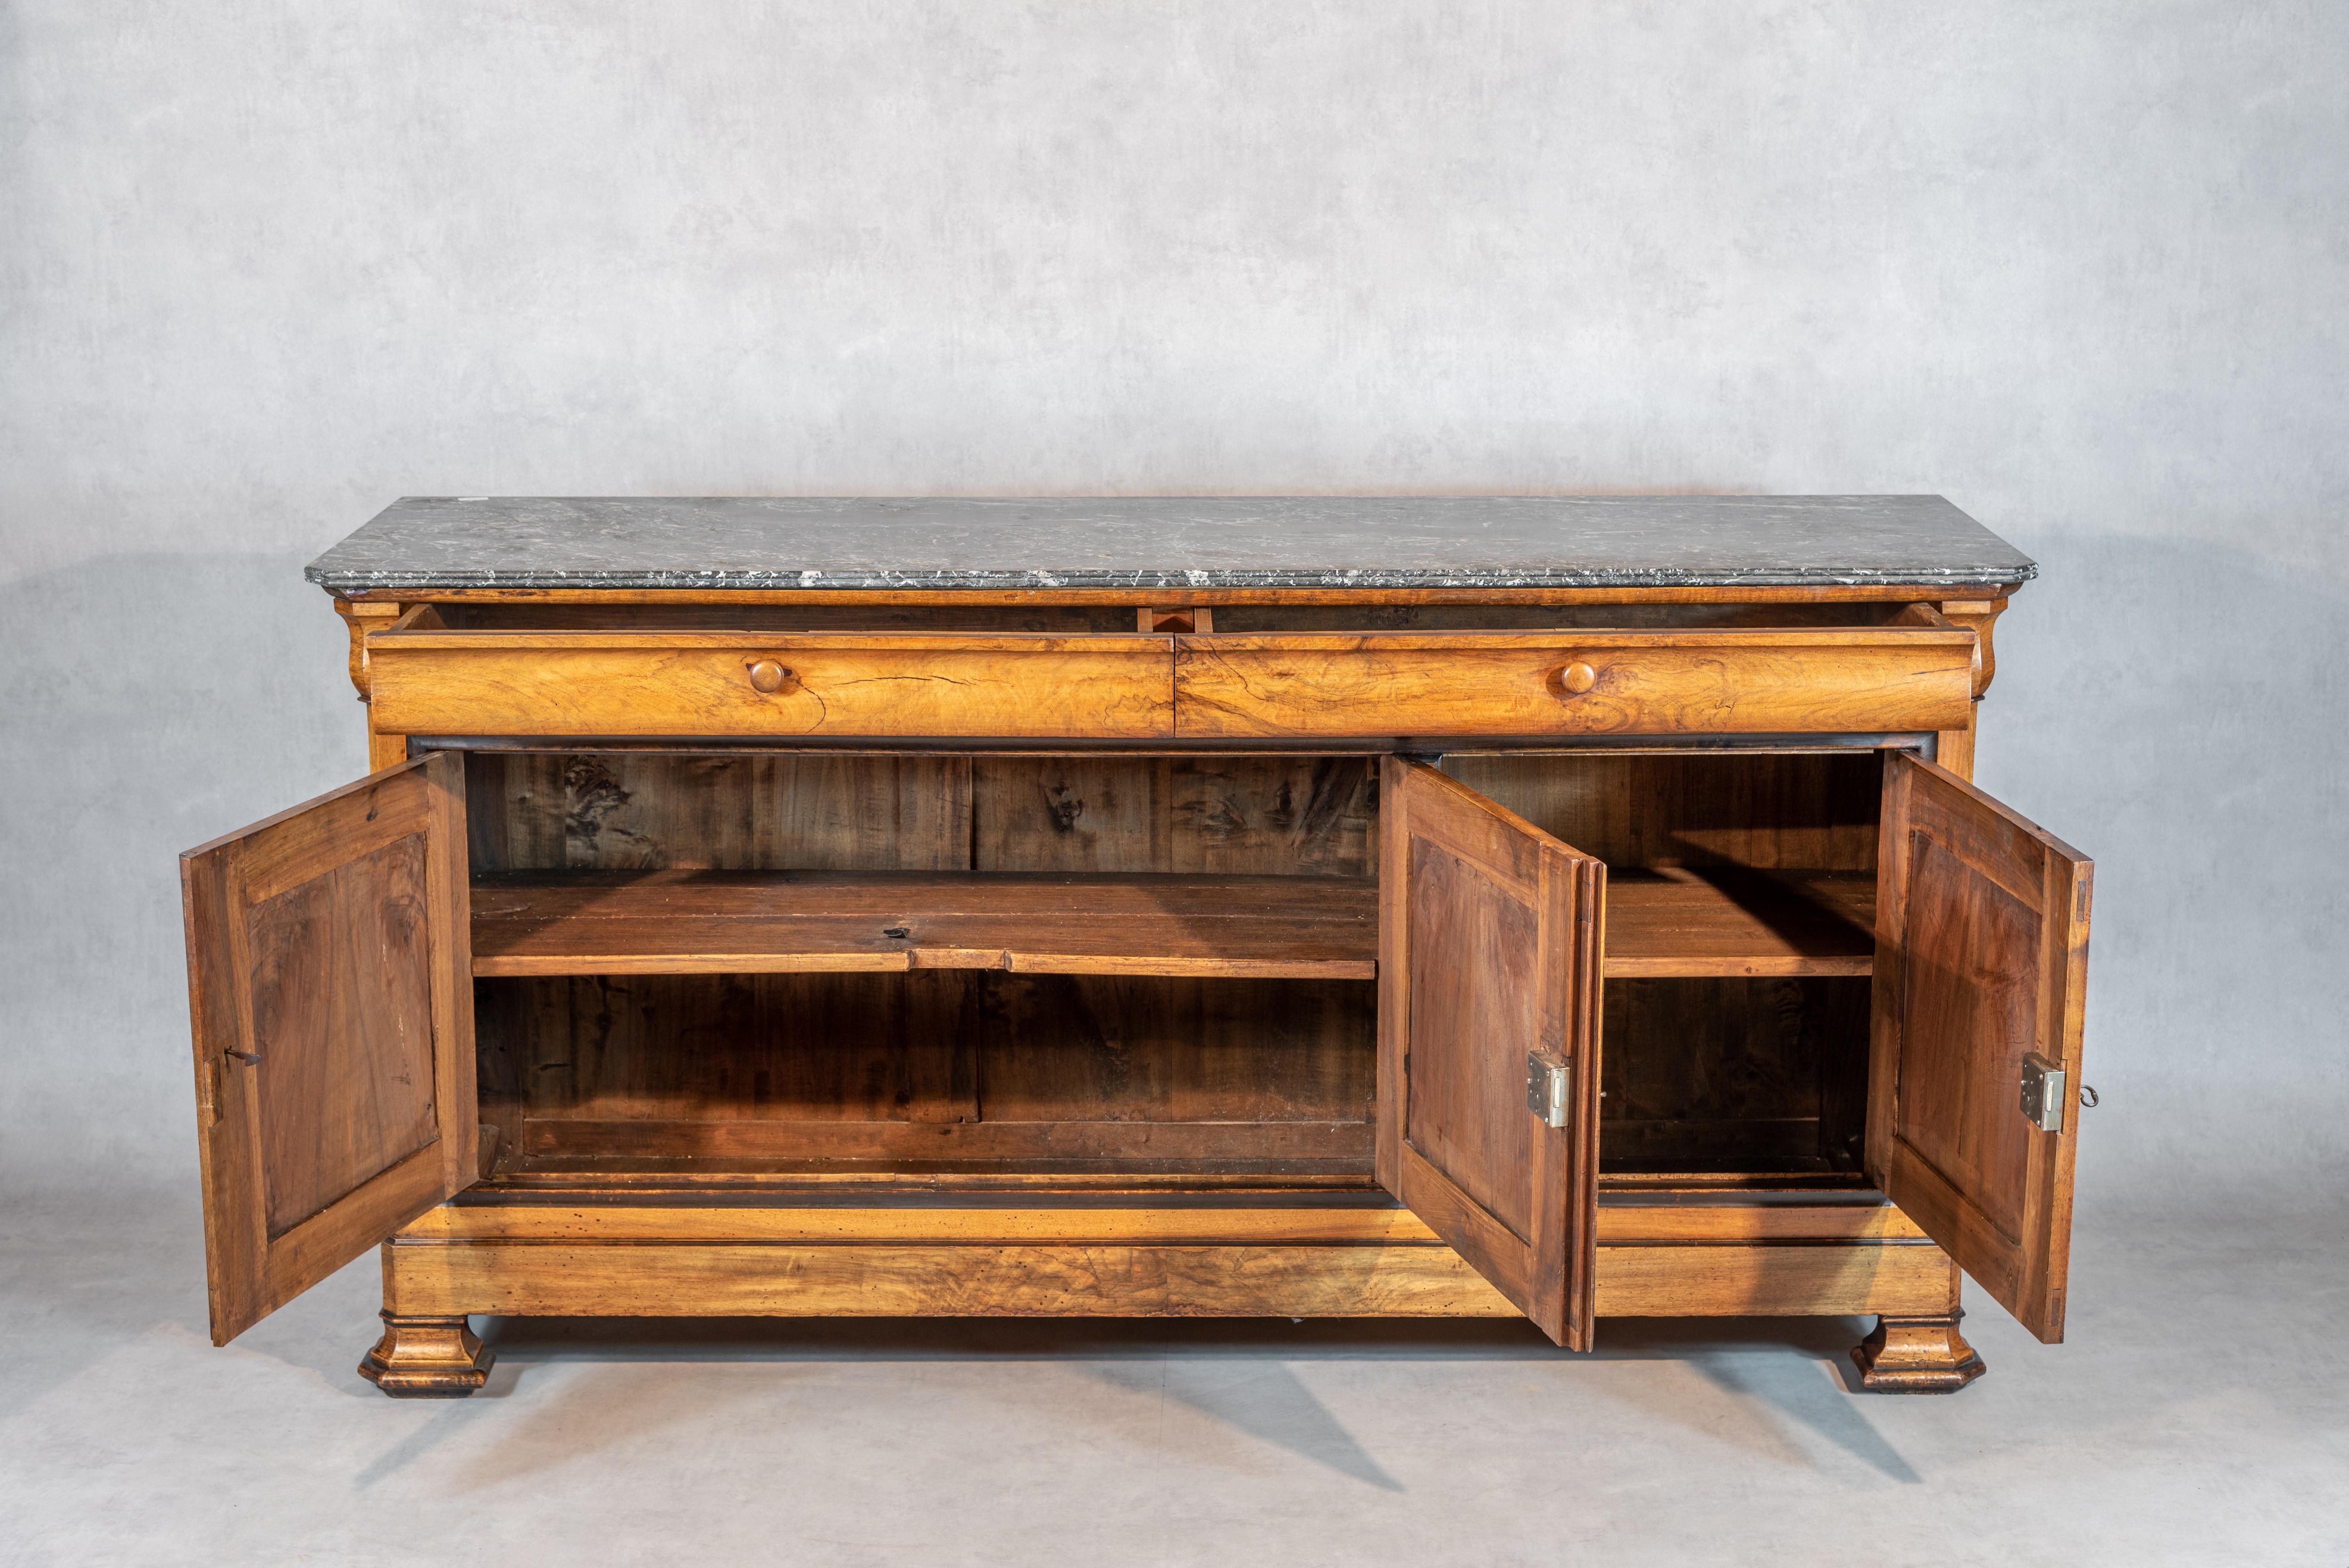 A superb French Louis Philippe Period Walnut Enfilade. This enfilade features three cabinet doors that give way to ample storage space inside, as well as two drawers on top. The front facades on the doors have a gorgeous walnut symmetrical veneer